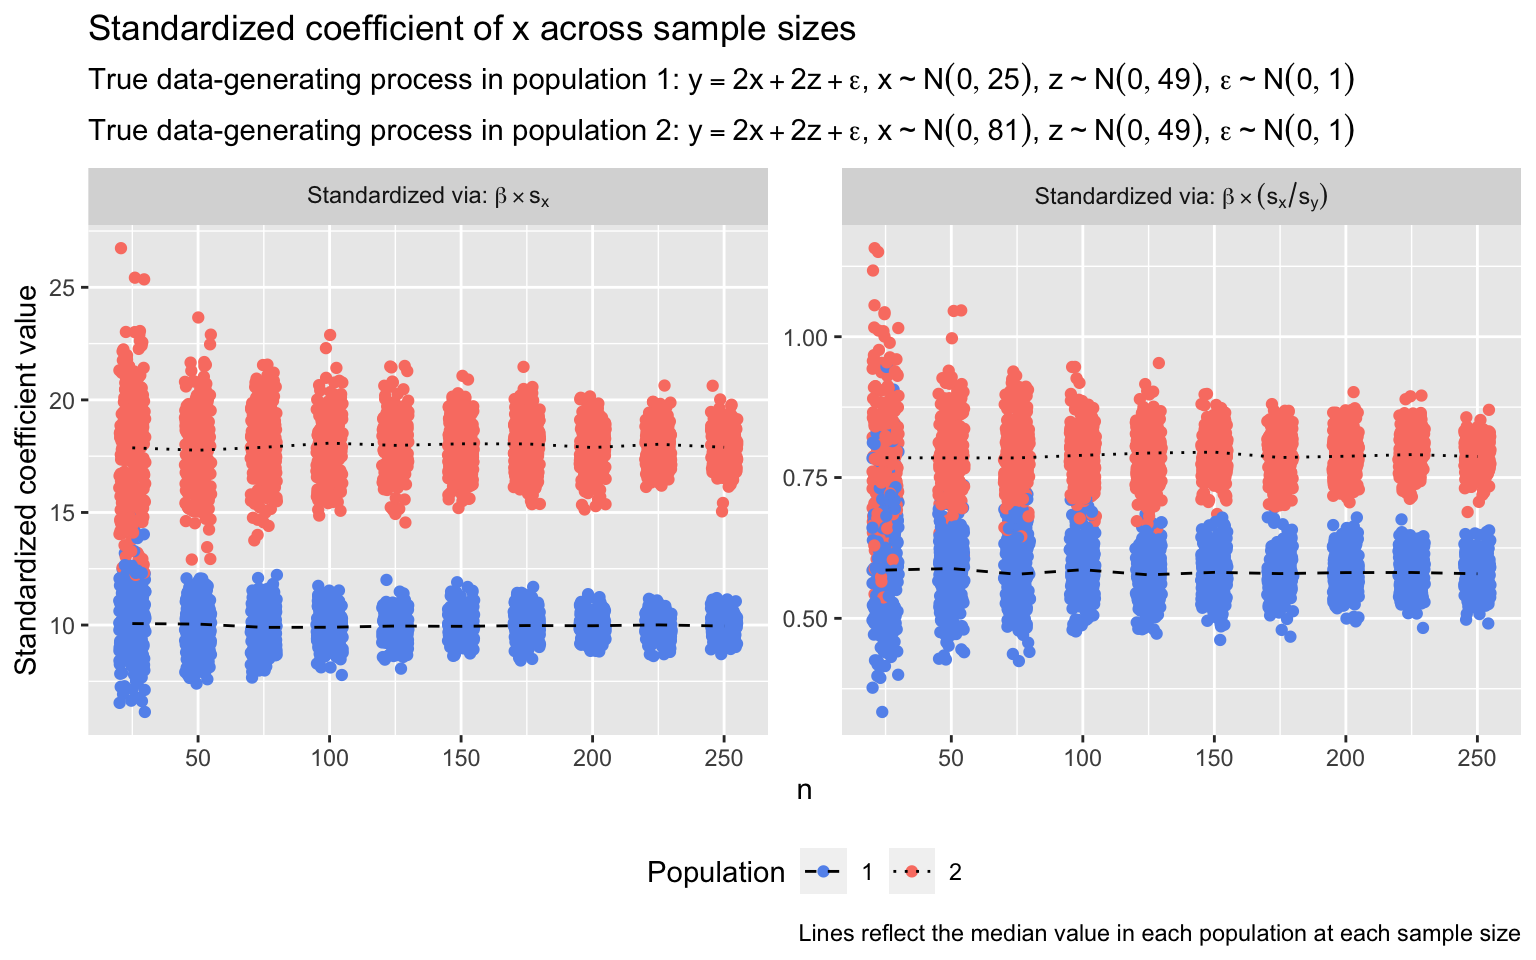 Standardized coefficients of x across sample sizes in two populations, where x’s unstandardized coefficient is the same but x’s standard deviation differs across populations